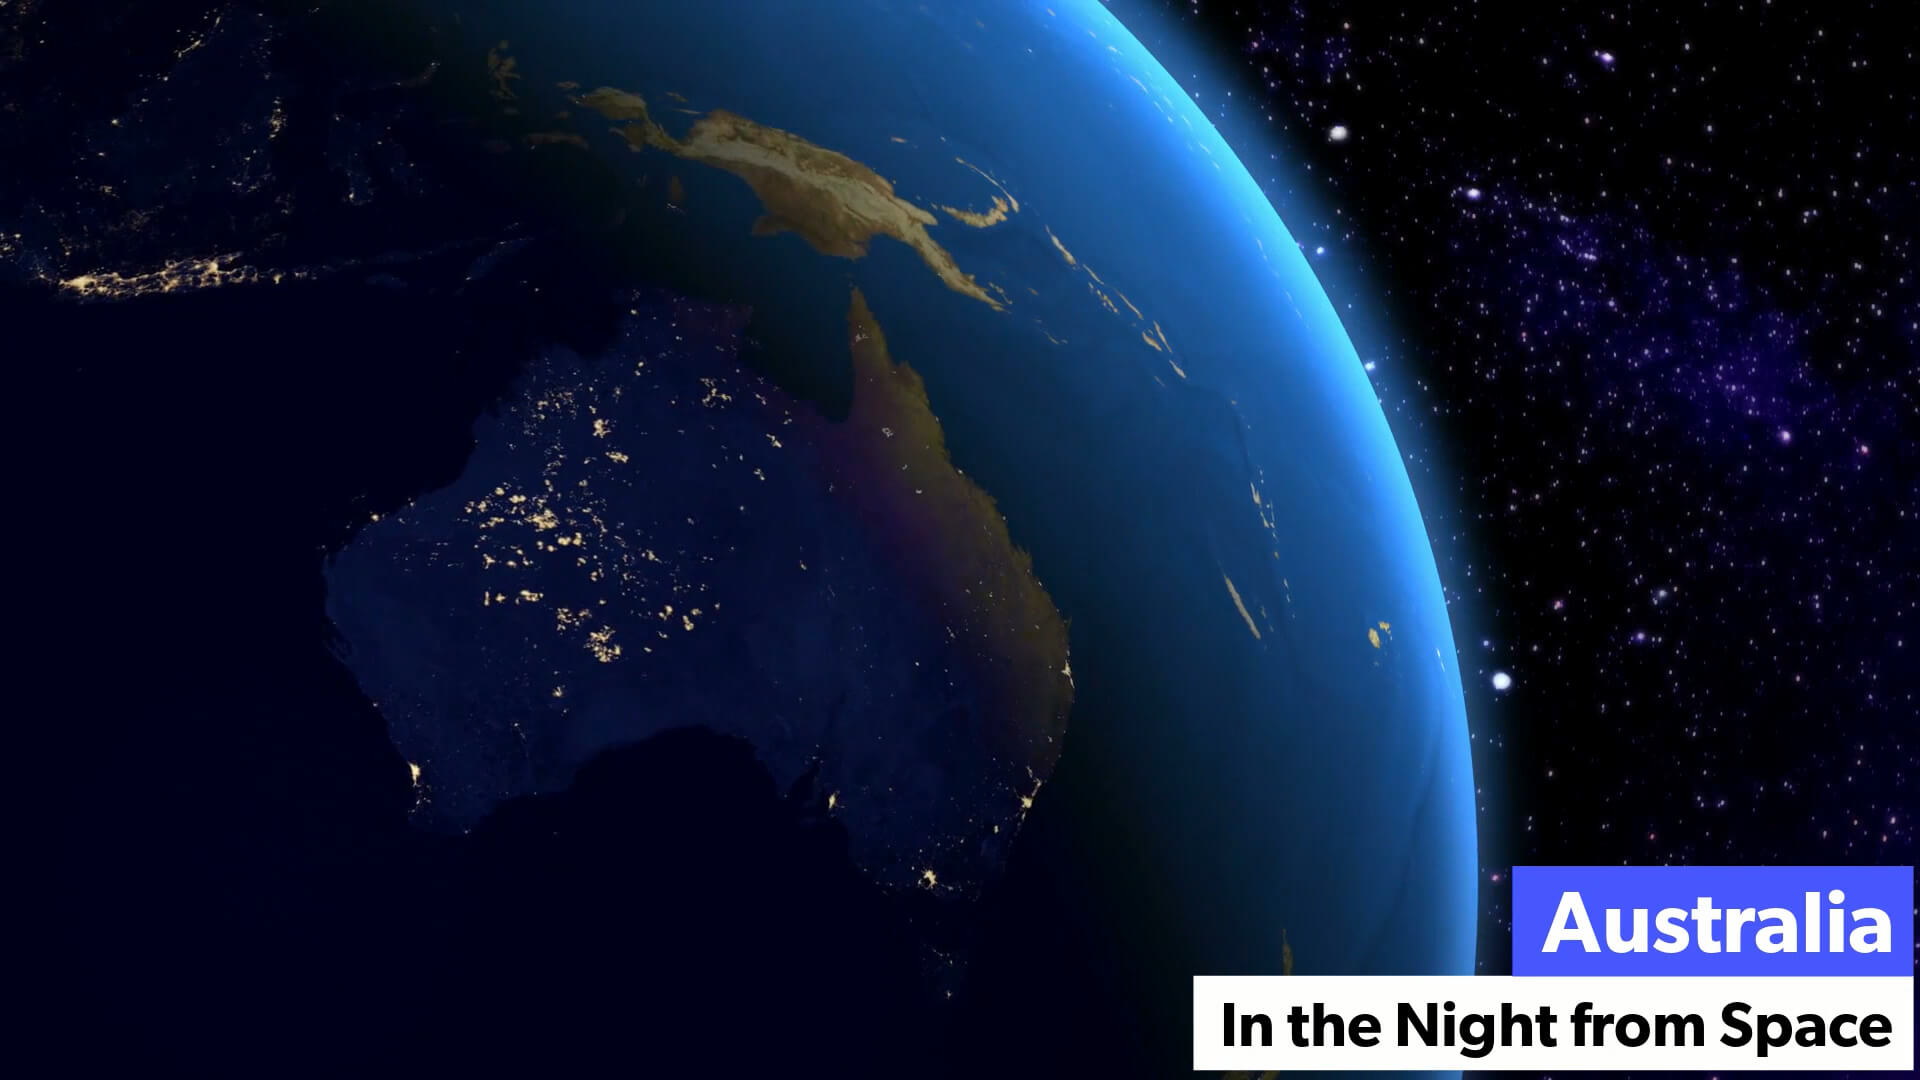 Australia and Oceania in the Night from Space